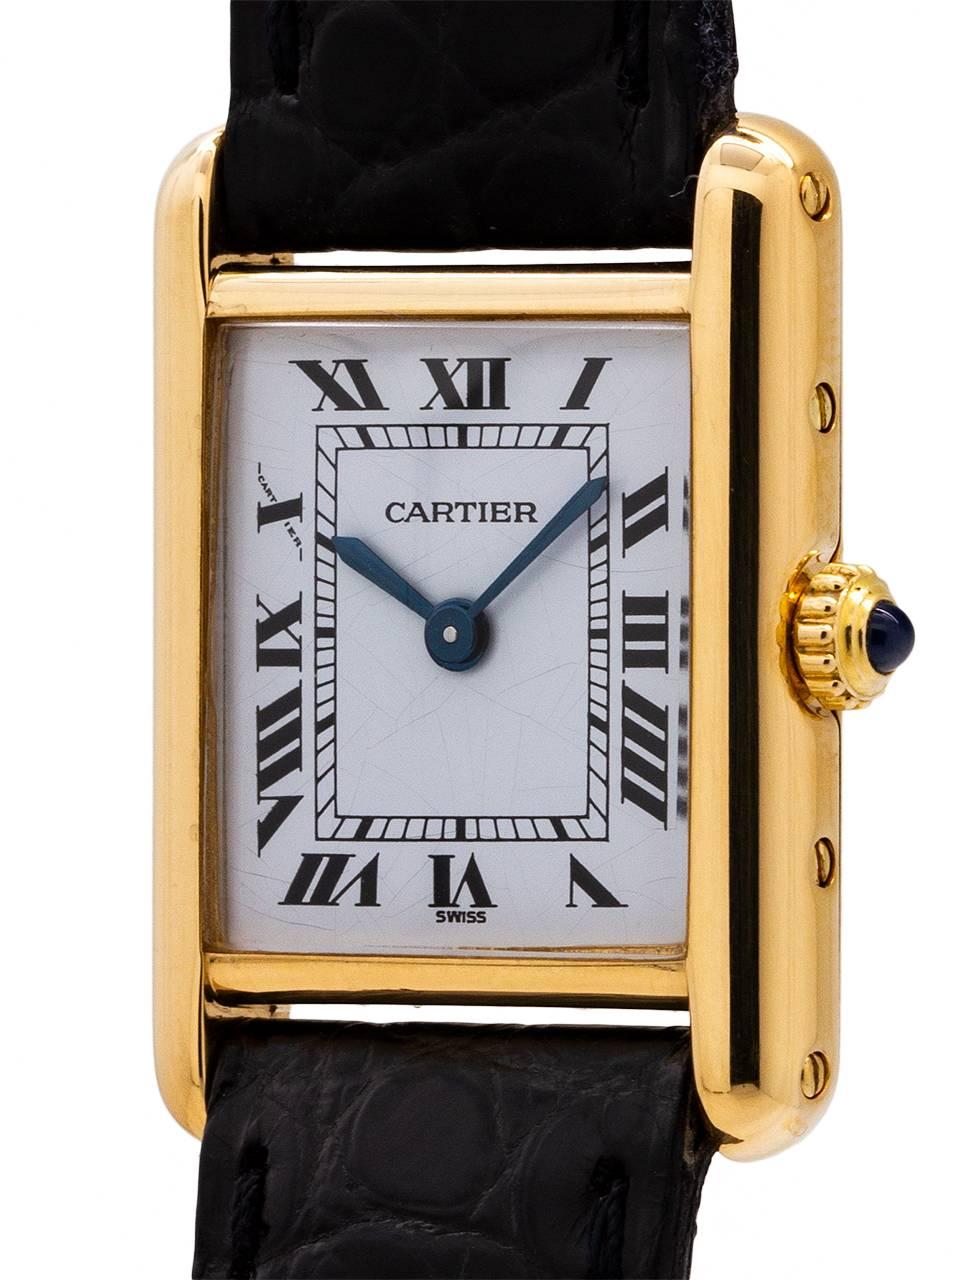 
Cartier Lady’s 18K gold Tank Louis circa 1970’s. Featuring 20.5 X 28mm case secured by 4 screws. Classic early silvered and finely grained original dial signed Cartier with black Roman numerals and blued steel hands and signed SWISS. The dial has